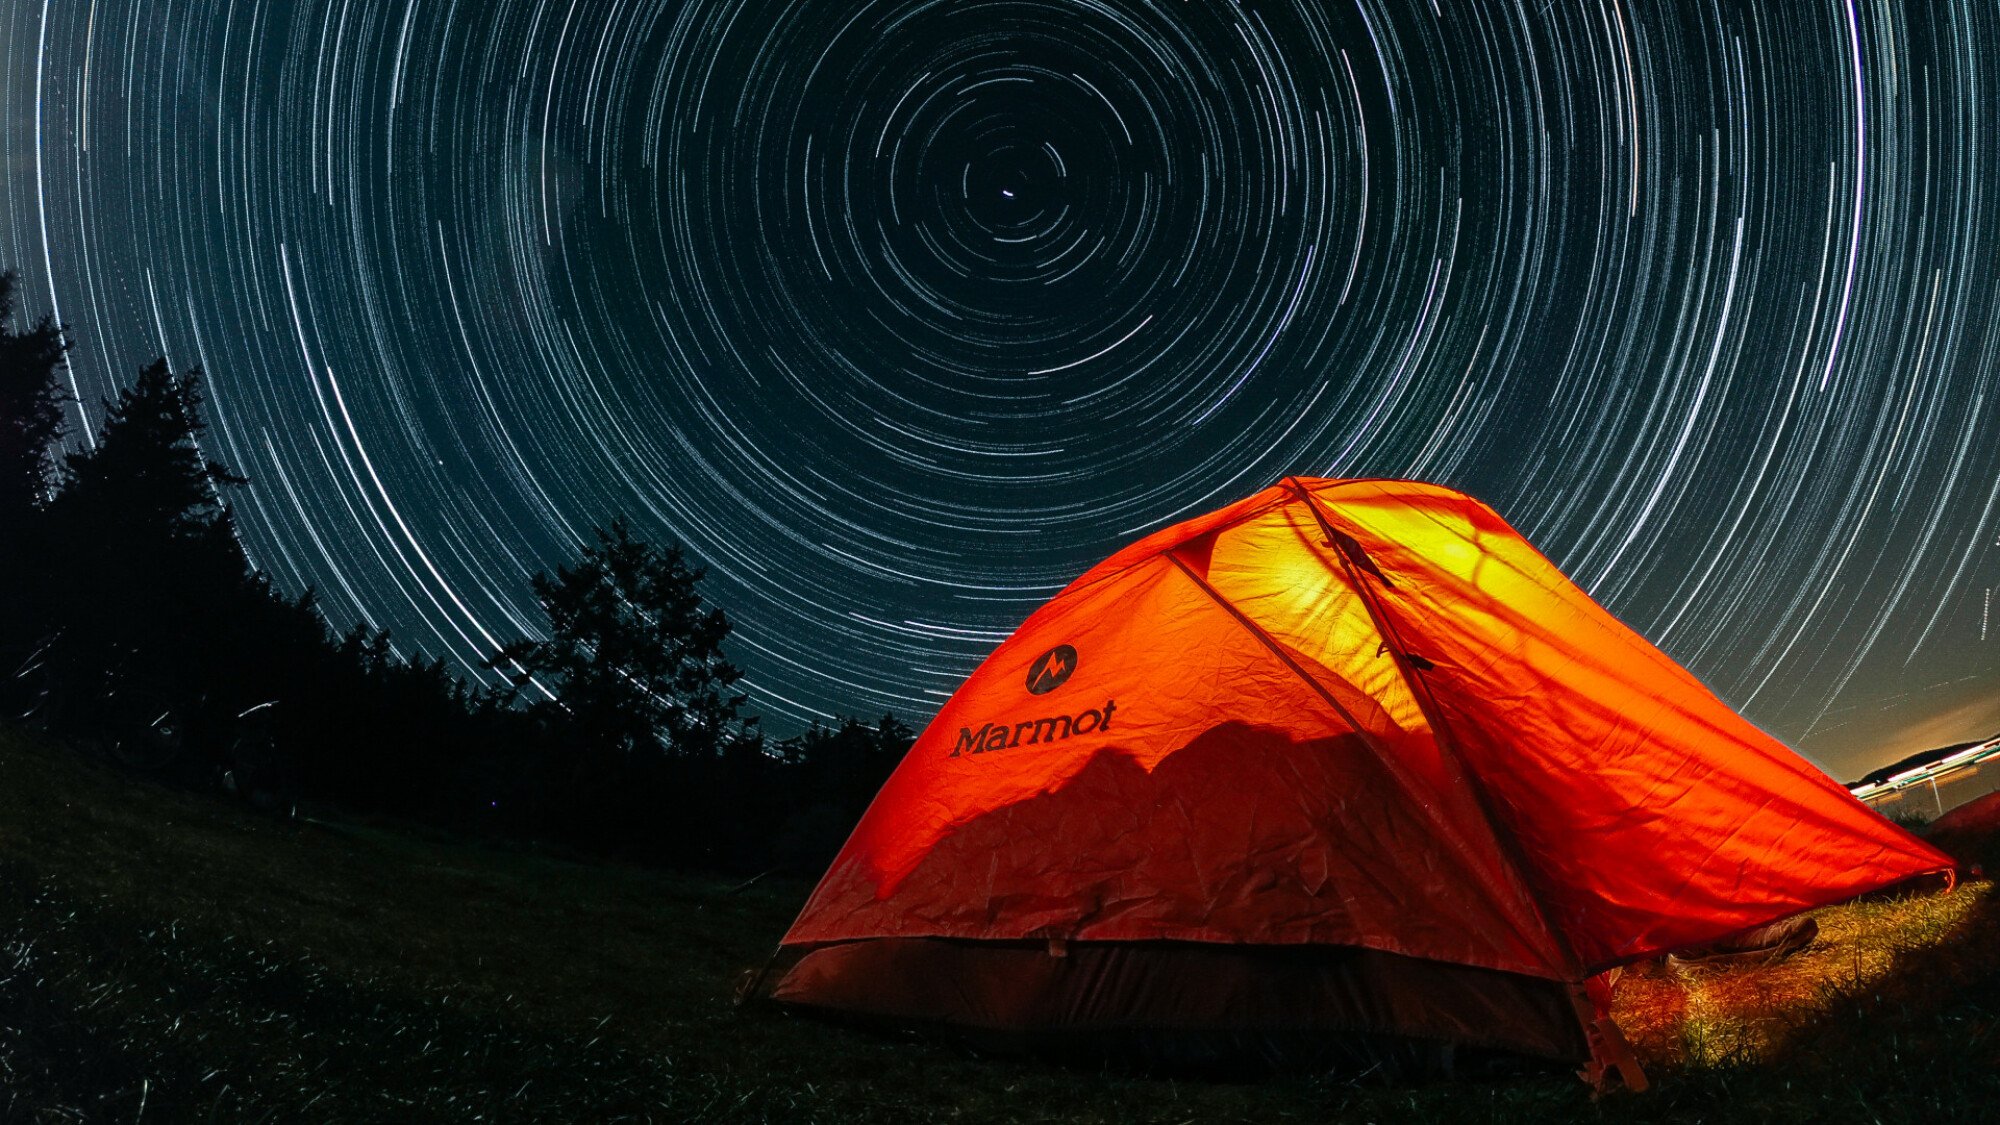 A photograph of star trails in the night sky over an orange tent.